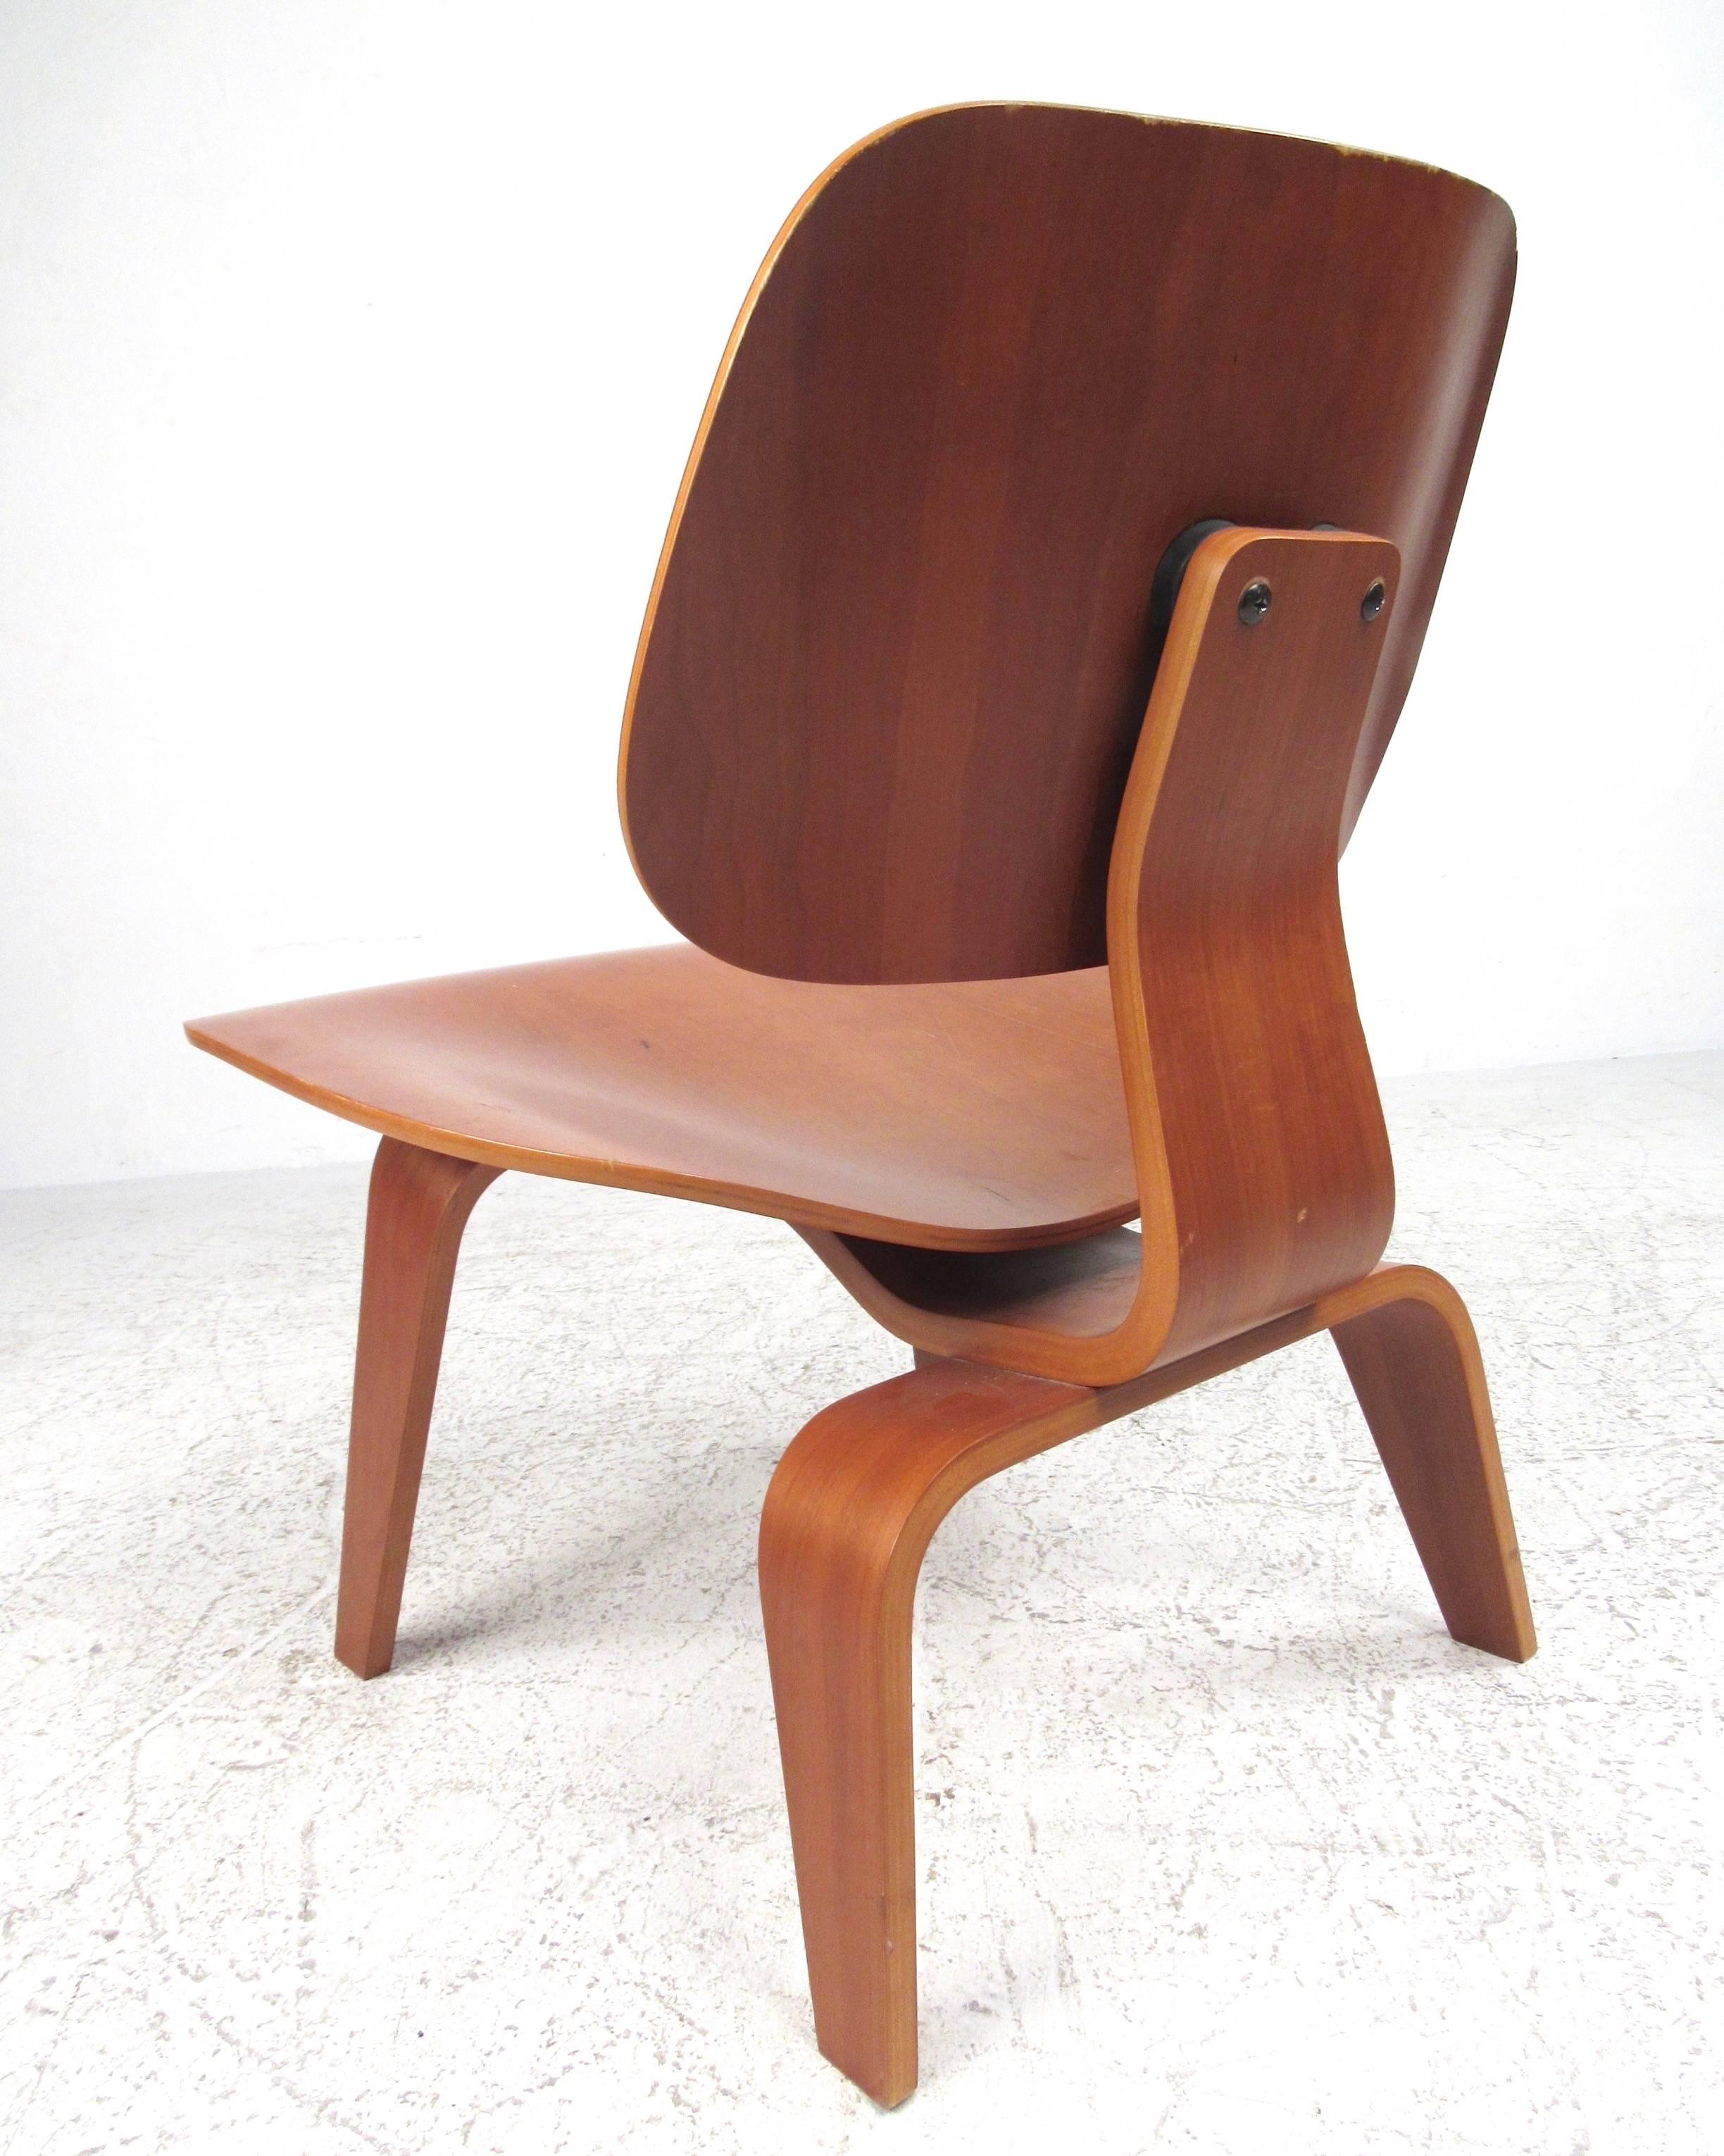 This unique sculpted side chair features bentwood construction in the memorable design of Charles Eames for Herman Miller. Incredible comfort with flowing Mid-Century Modern lines, this contemporary issuing of the DCW chair is in good condition and